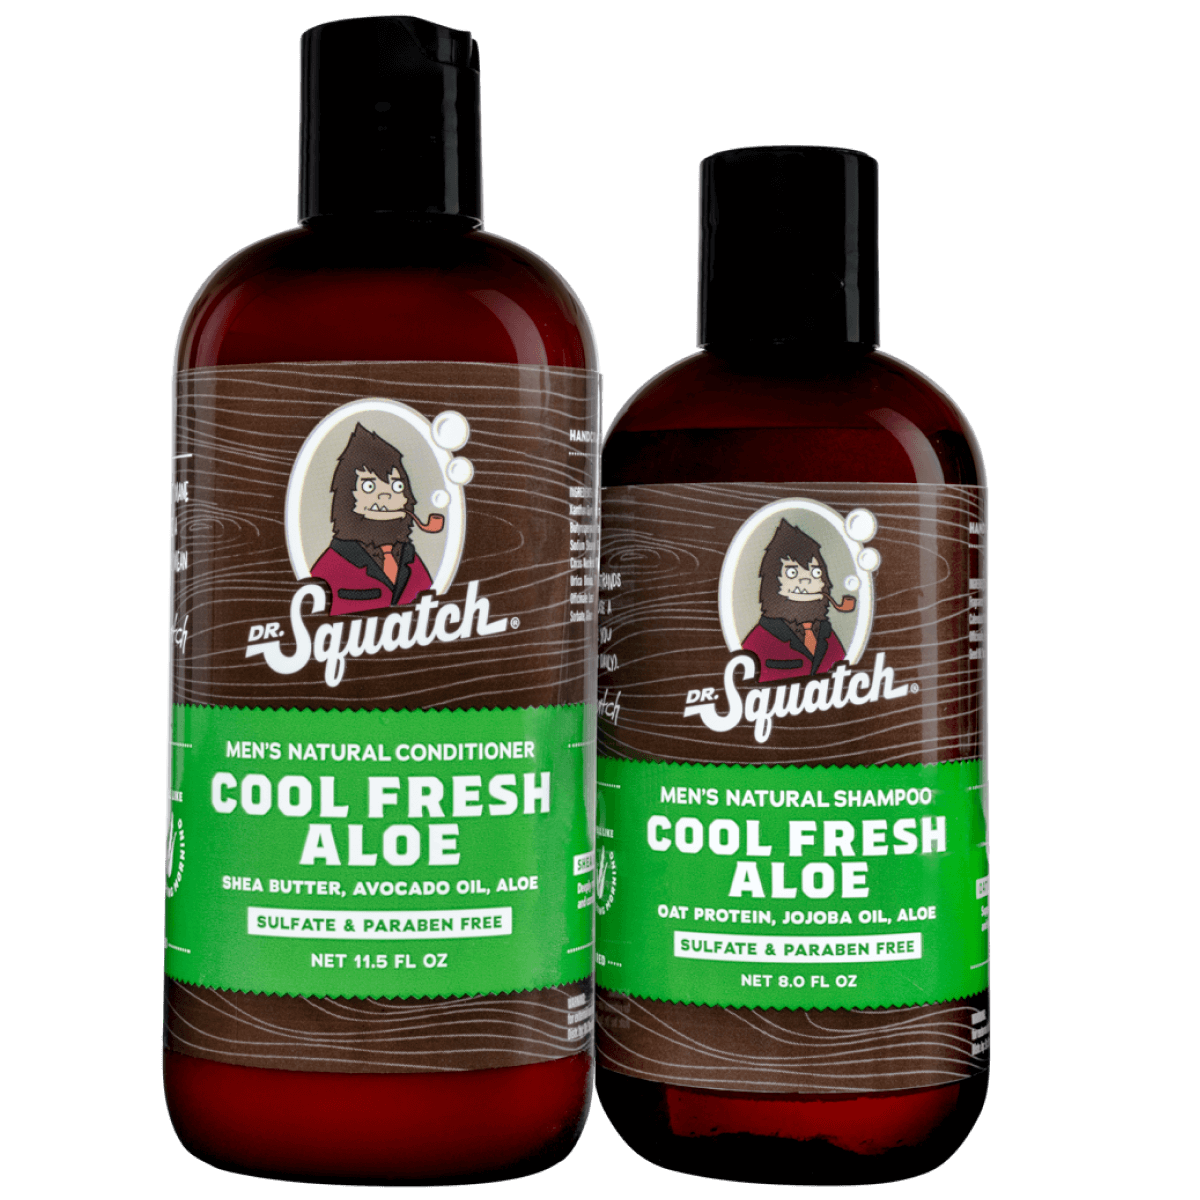 Hair Products For Men | Natural Men's Hair Care Products - Dr. Squatch